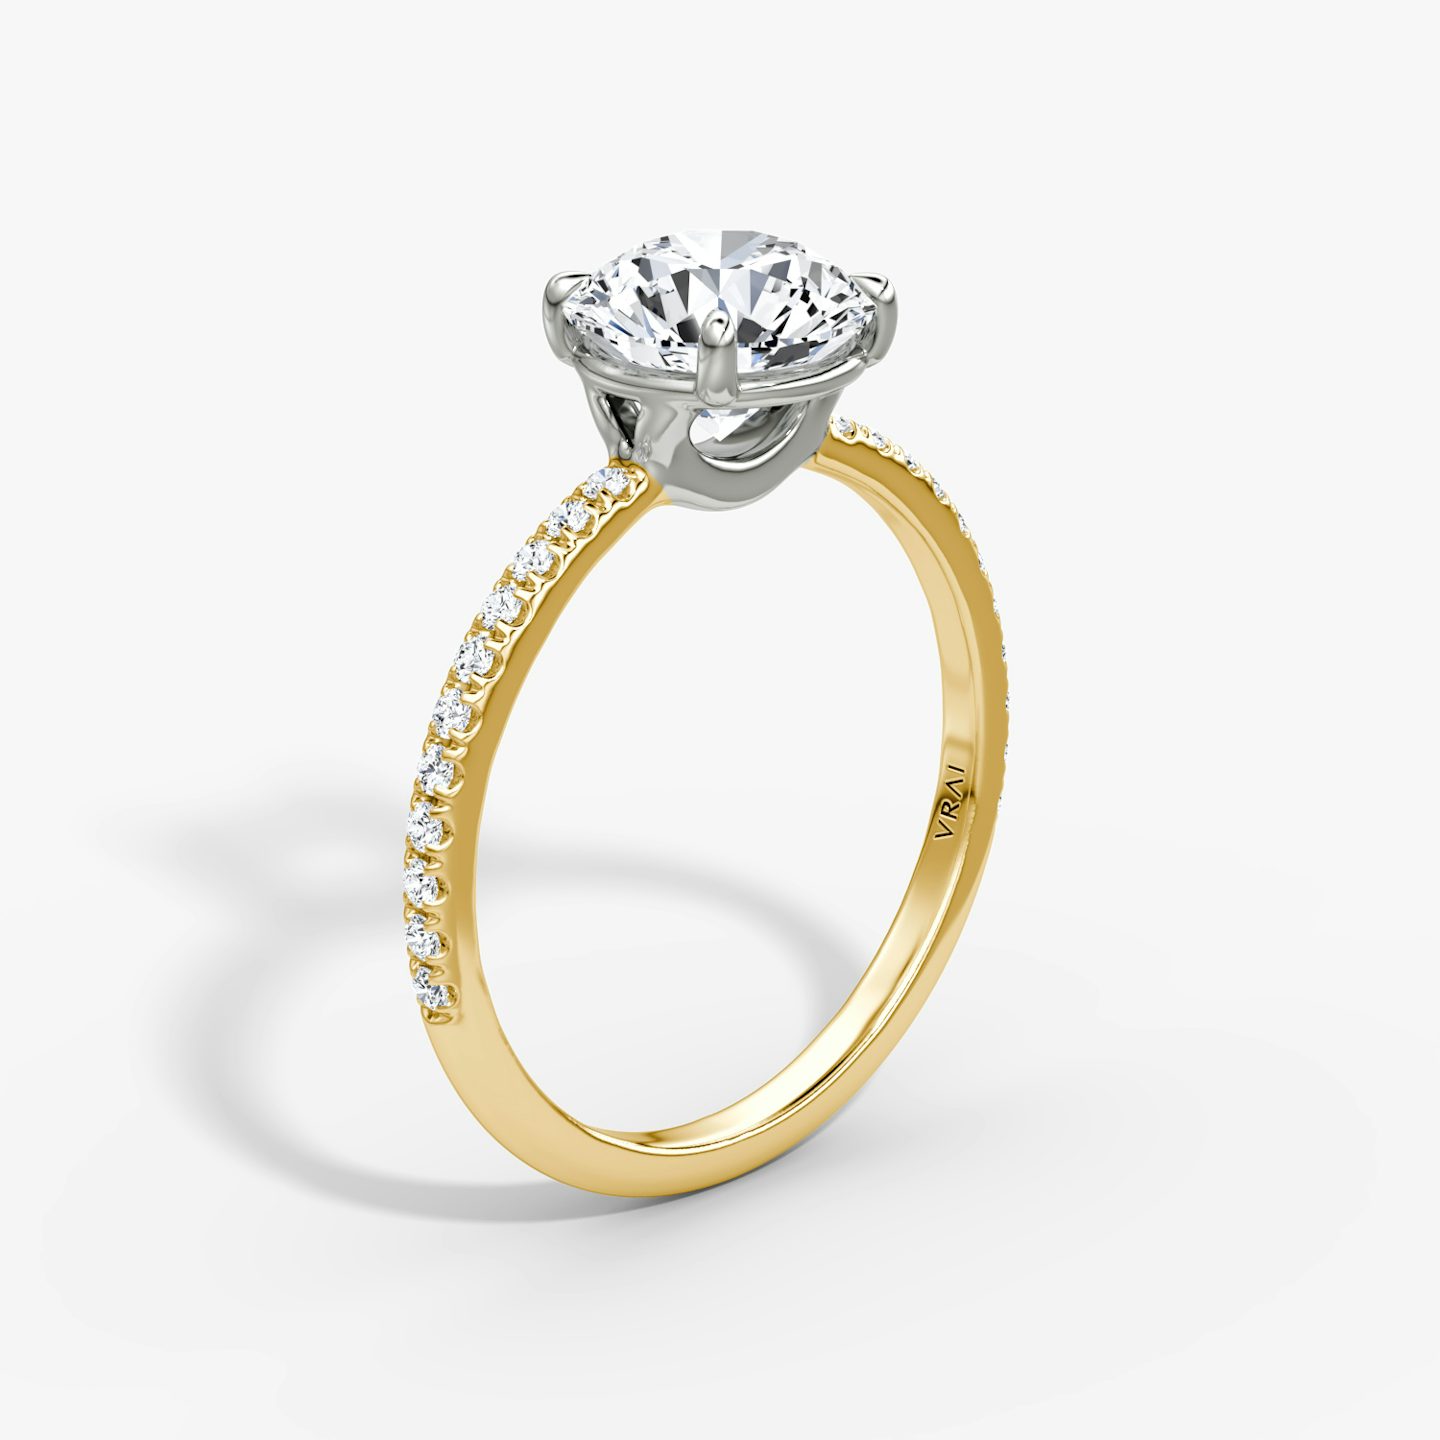 The Signature | Round Brilliant | 18k | 18k Yellow Gold and Platinum | Band width: Standard | Band: Pavé | Setting style: Plain | Carat weight: 2 | Diamond orientation: vertical